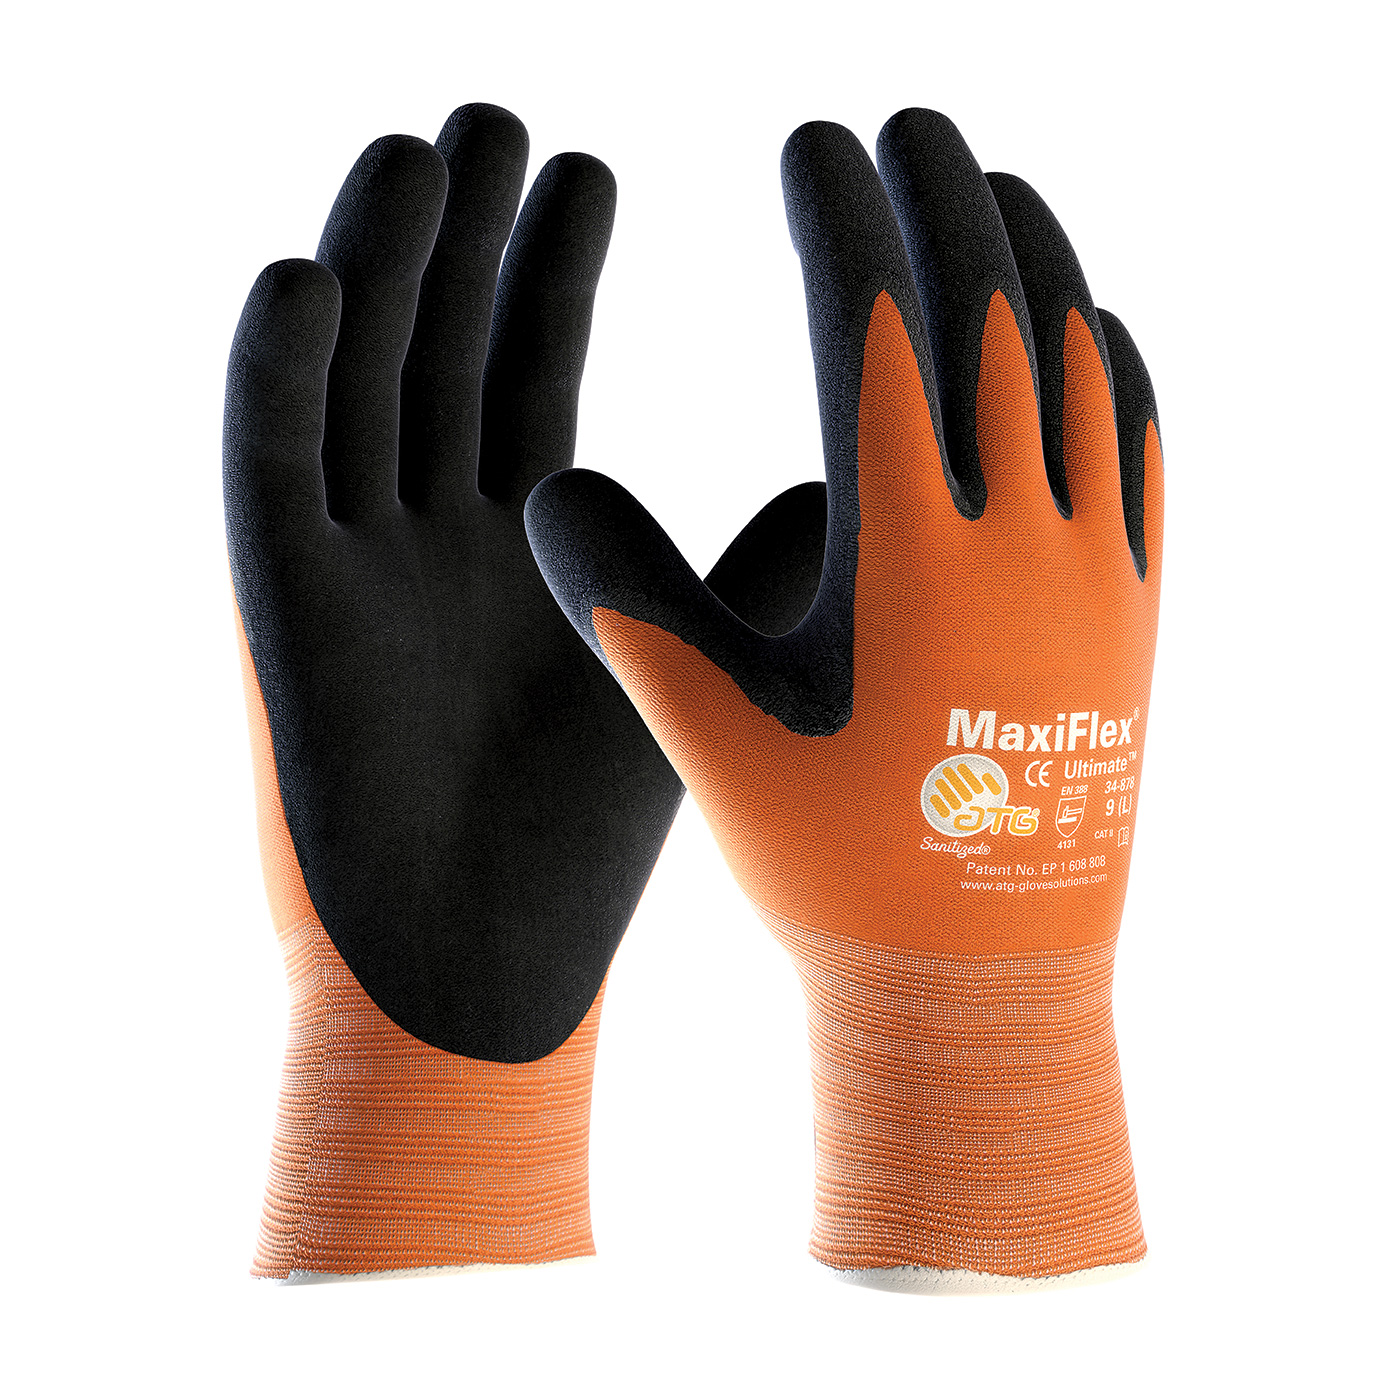 PIP 34-8014/L MaxiFlex Ultimate Hi-Vis Seamless Knit Nylon Glove with Nitrile Coated MicroFoam Grip on Palm & Fingers - Large PID-34 8014 L